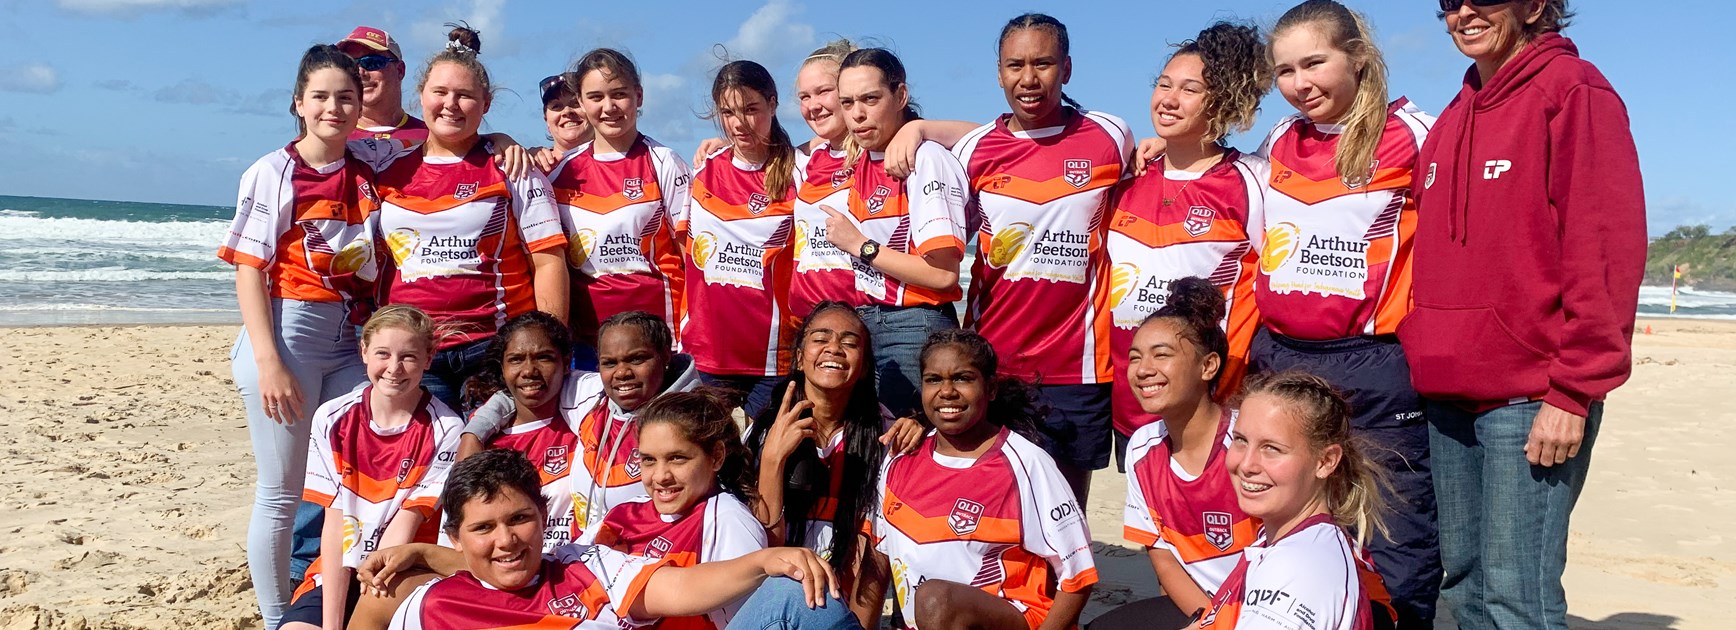 One of Queensland's junior Outback teams.